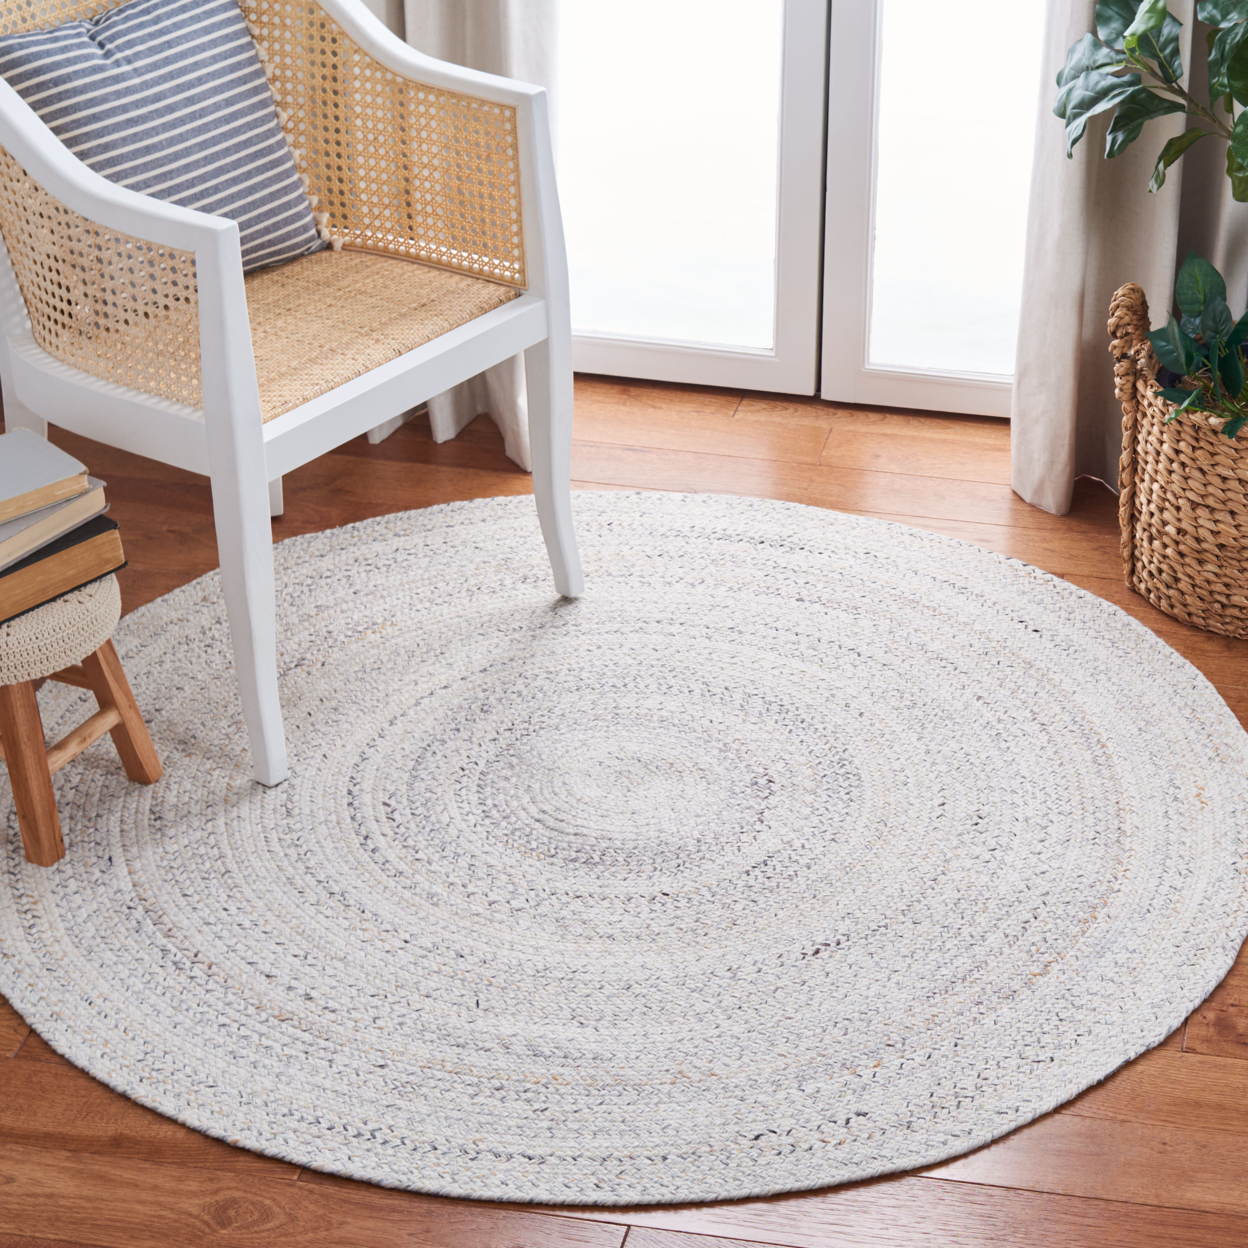 SAFAVIEH Braided Collection BRD851A Handwoven Ivory Rug - 4' Round